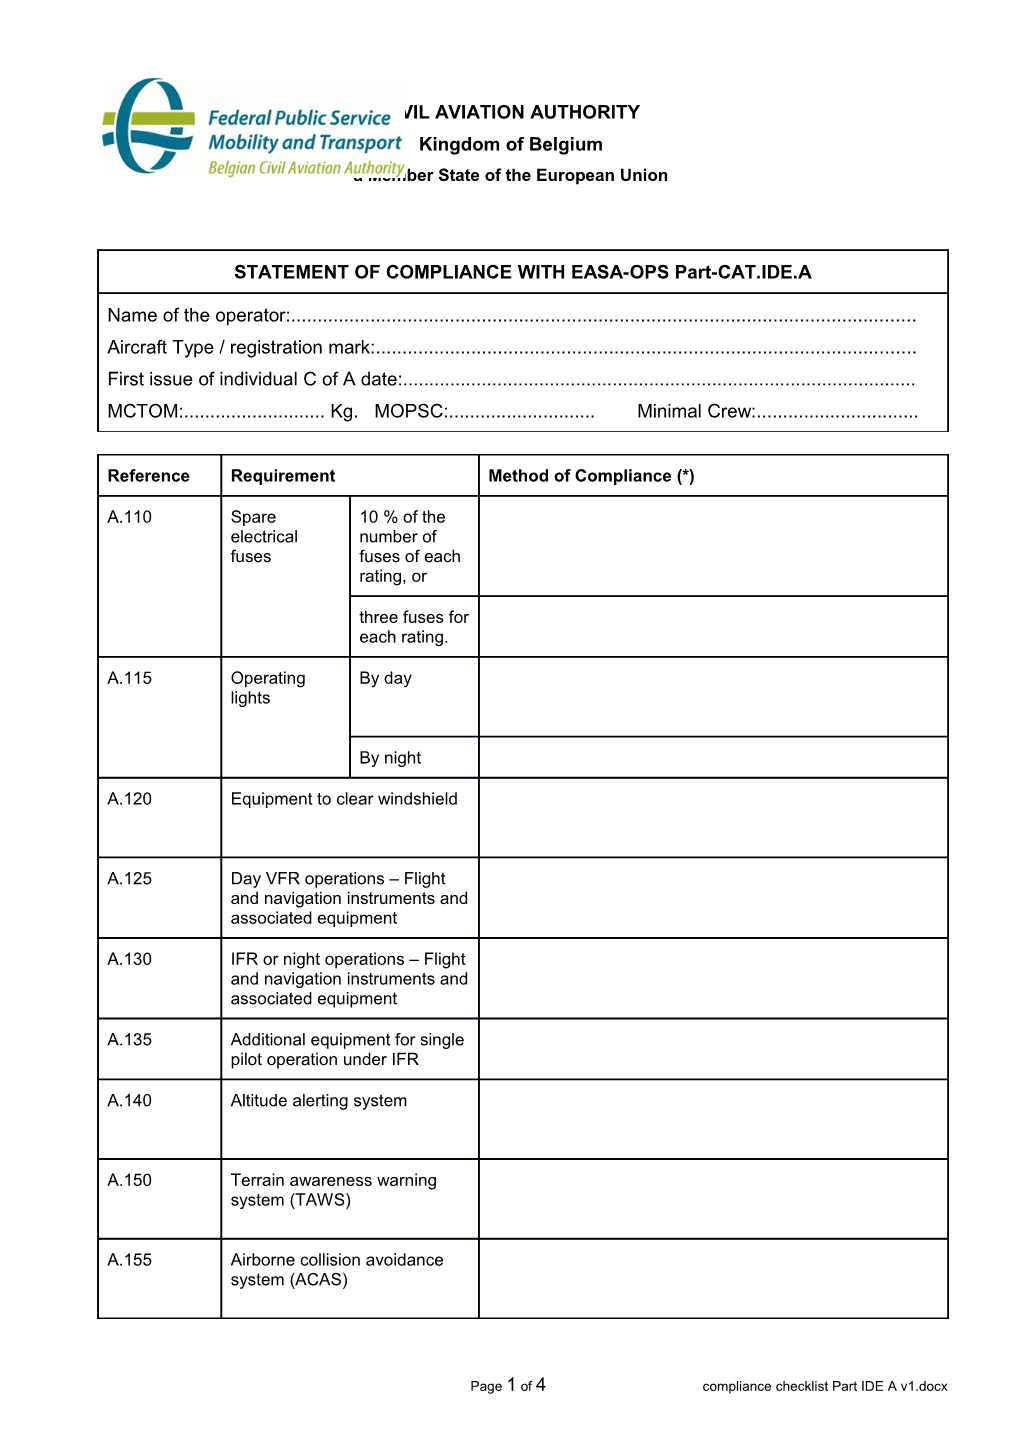 Statement of Compliance Form with Eu-Ops 1 Subparts K and L